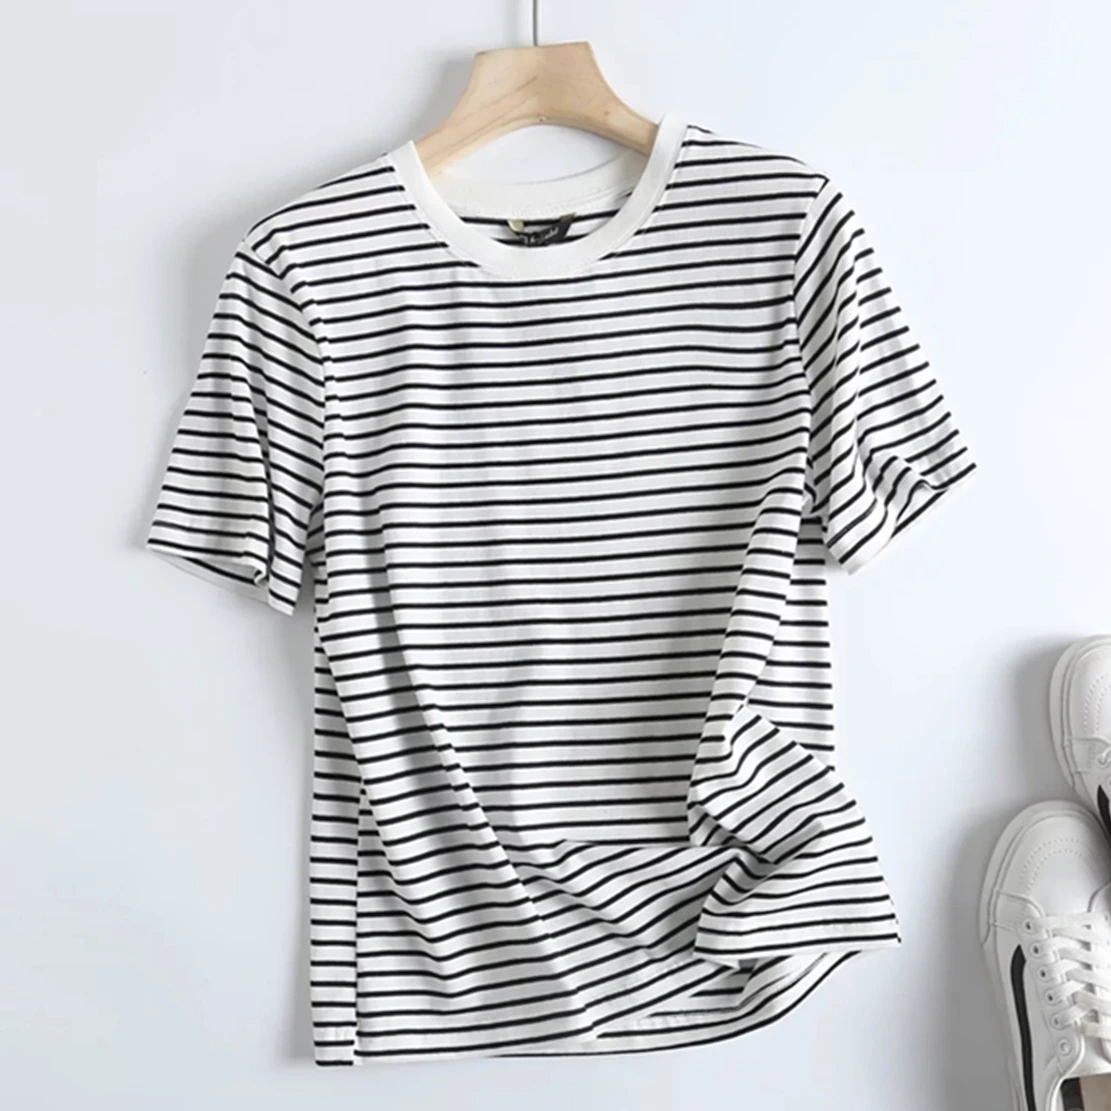 

Elmsk England Style Casual Summer T Shirt Tops Fashion Simple Striped Round Collar Cotton Tshirts Women